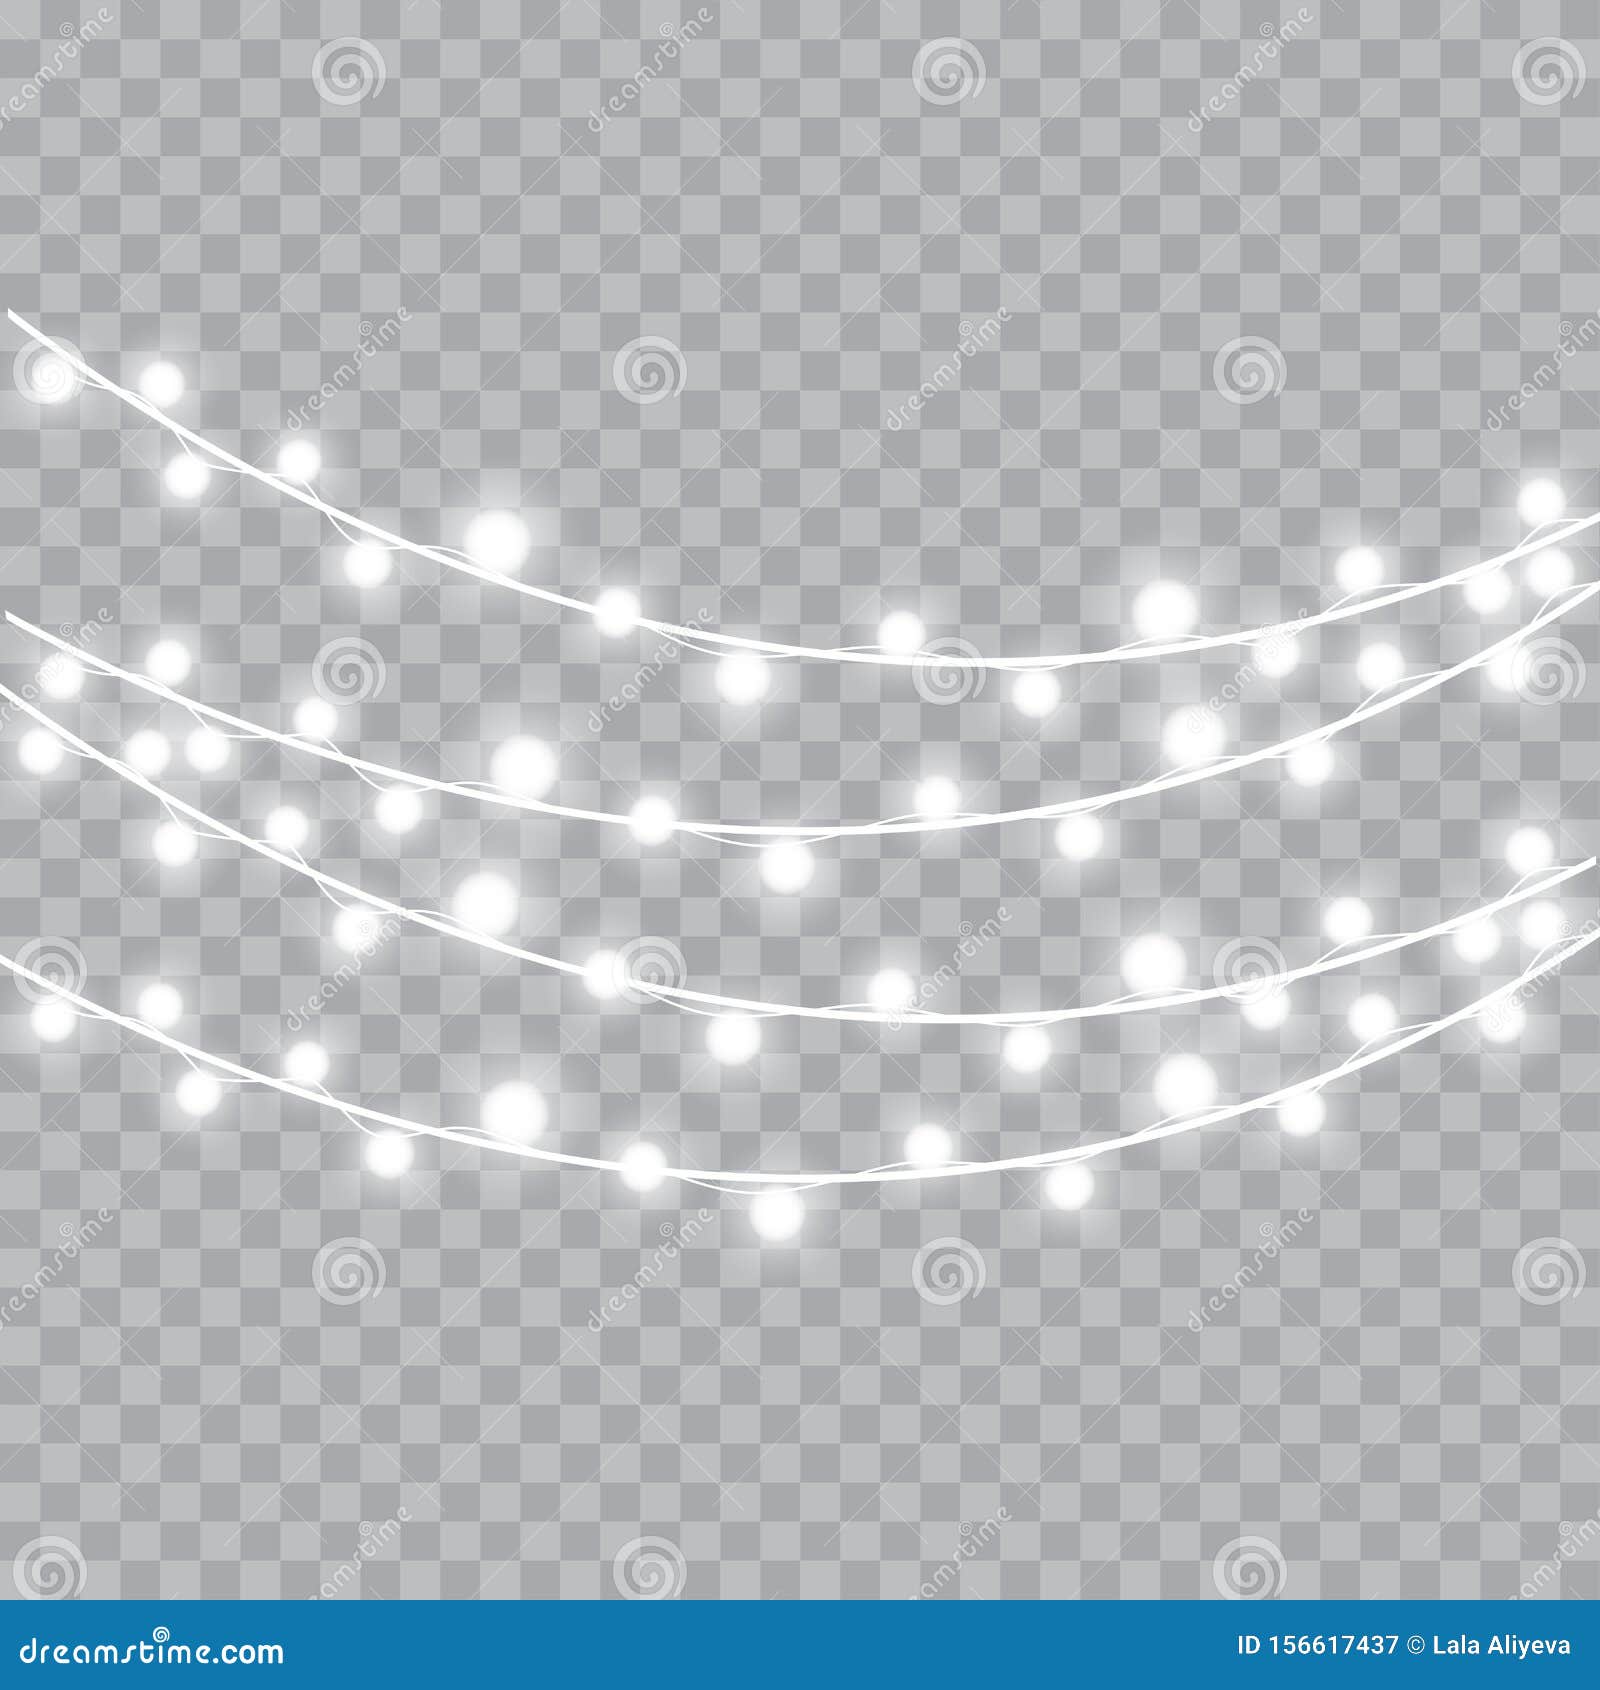 Christmas Lights Isolated Realistic Design Elements. Vector Stock ...